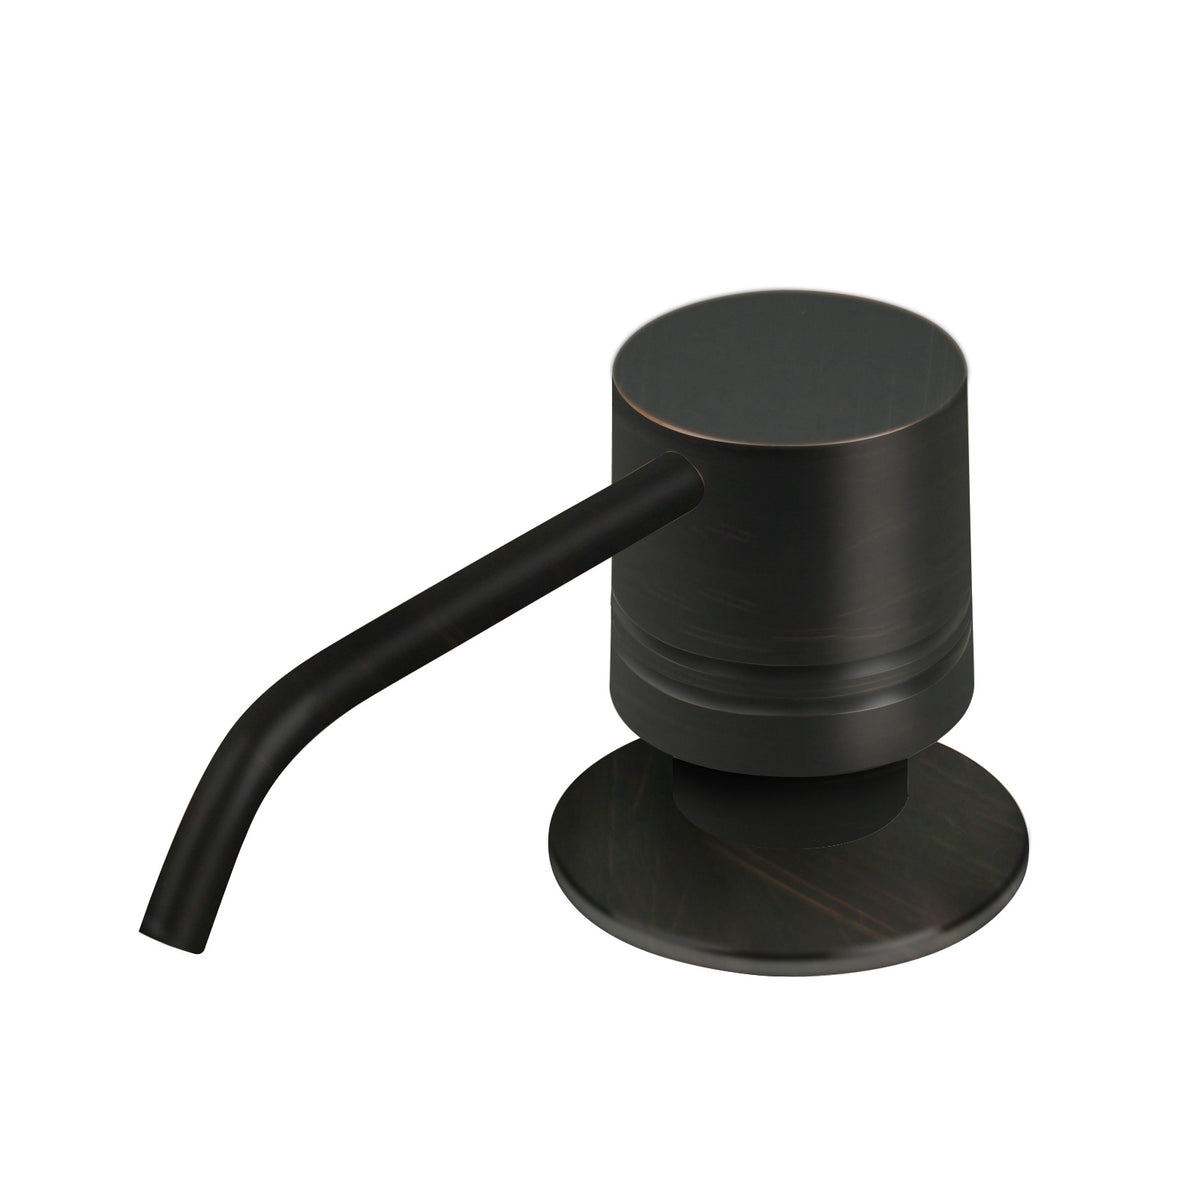 Built in Oil Rubbed Bronze Soap Dispenser Refill from Top with 17 OZ Bottle - AK81002ORB